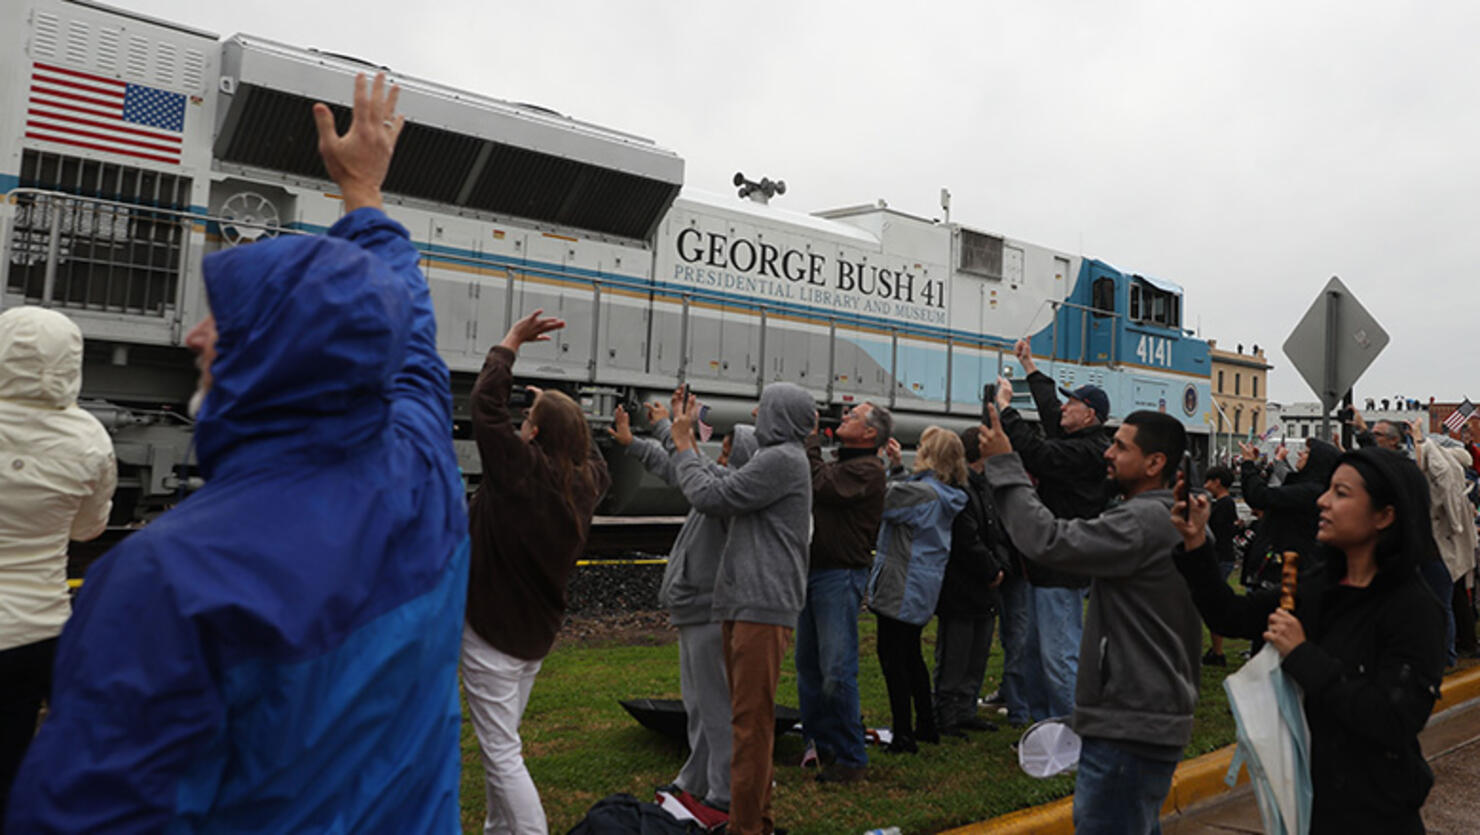 People wave at the train carrying the casket of former U.S. President George H.W. Bush to the George H.W. Bush Presidential Library at Texas A&M University